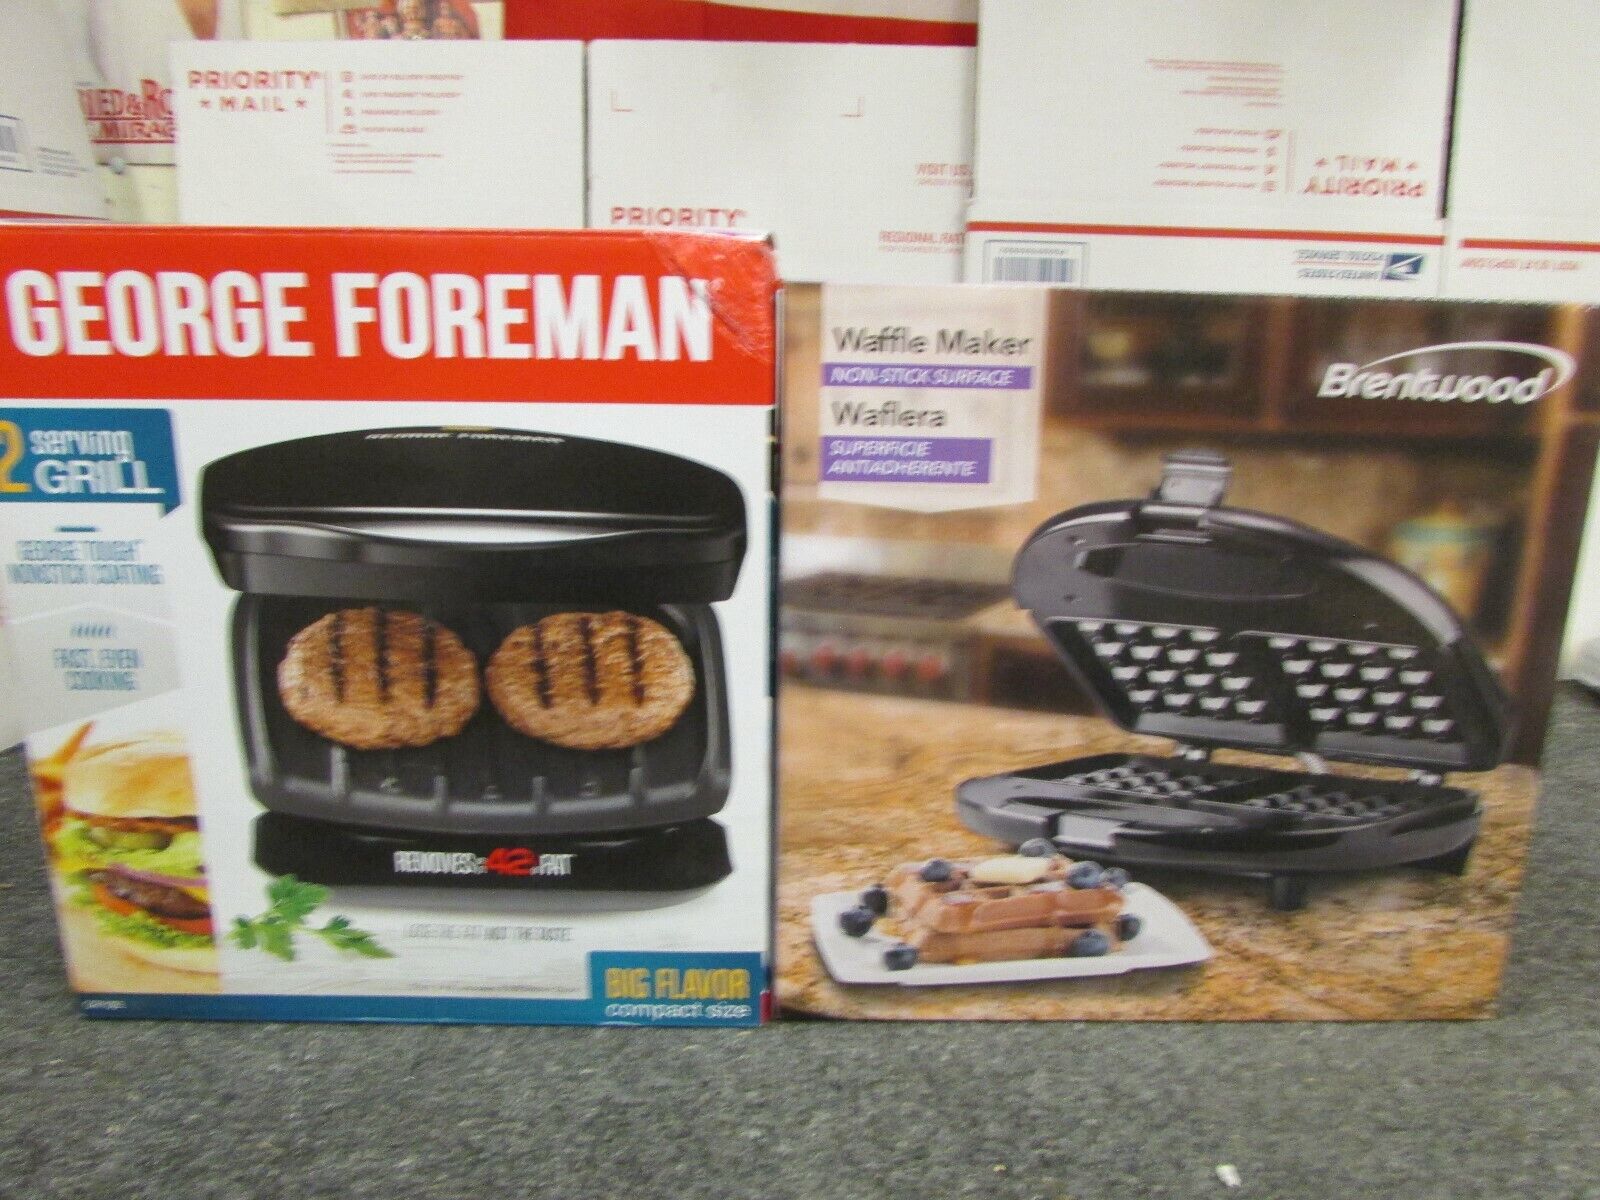 George Foreman 2 Serving Grill GR10B & Brentwood Waffle Maker Mo